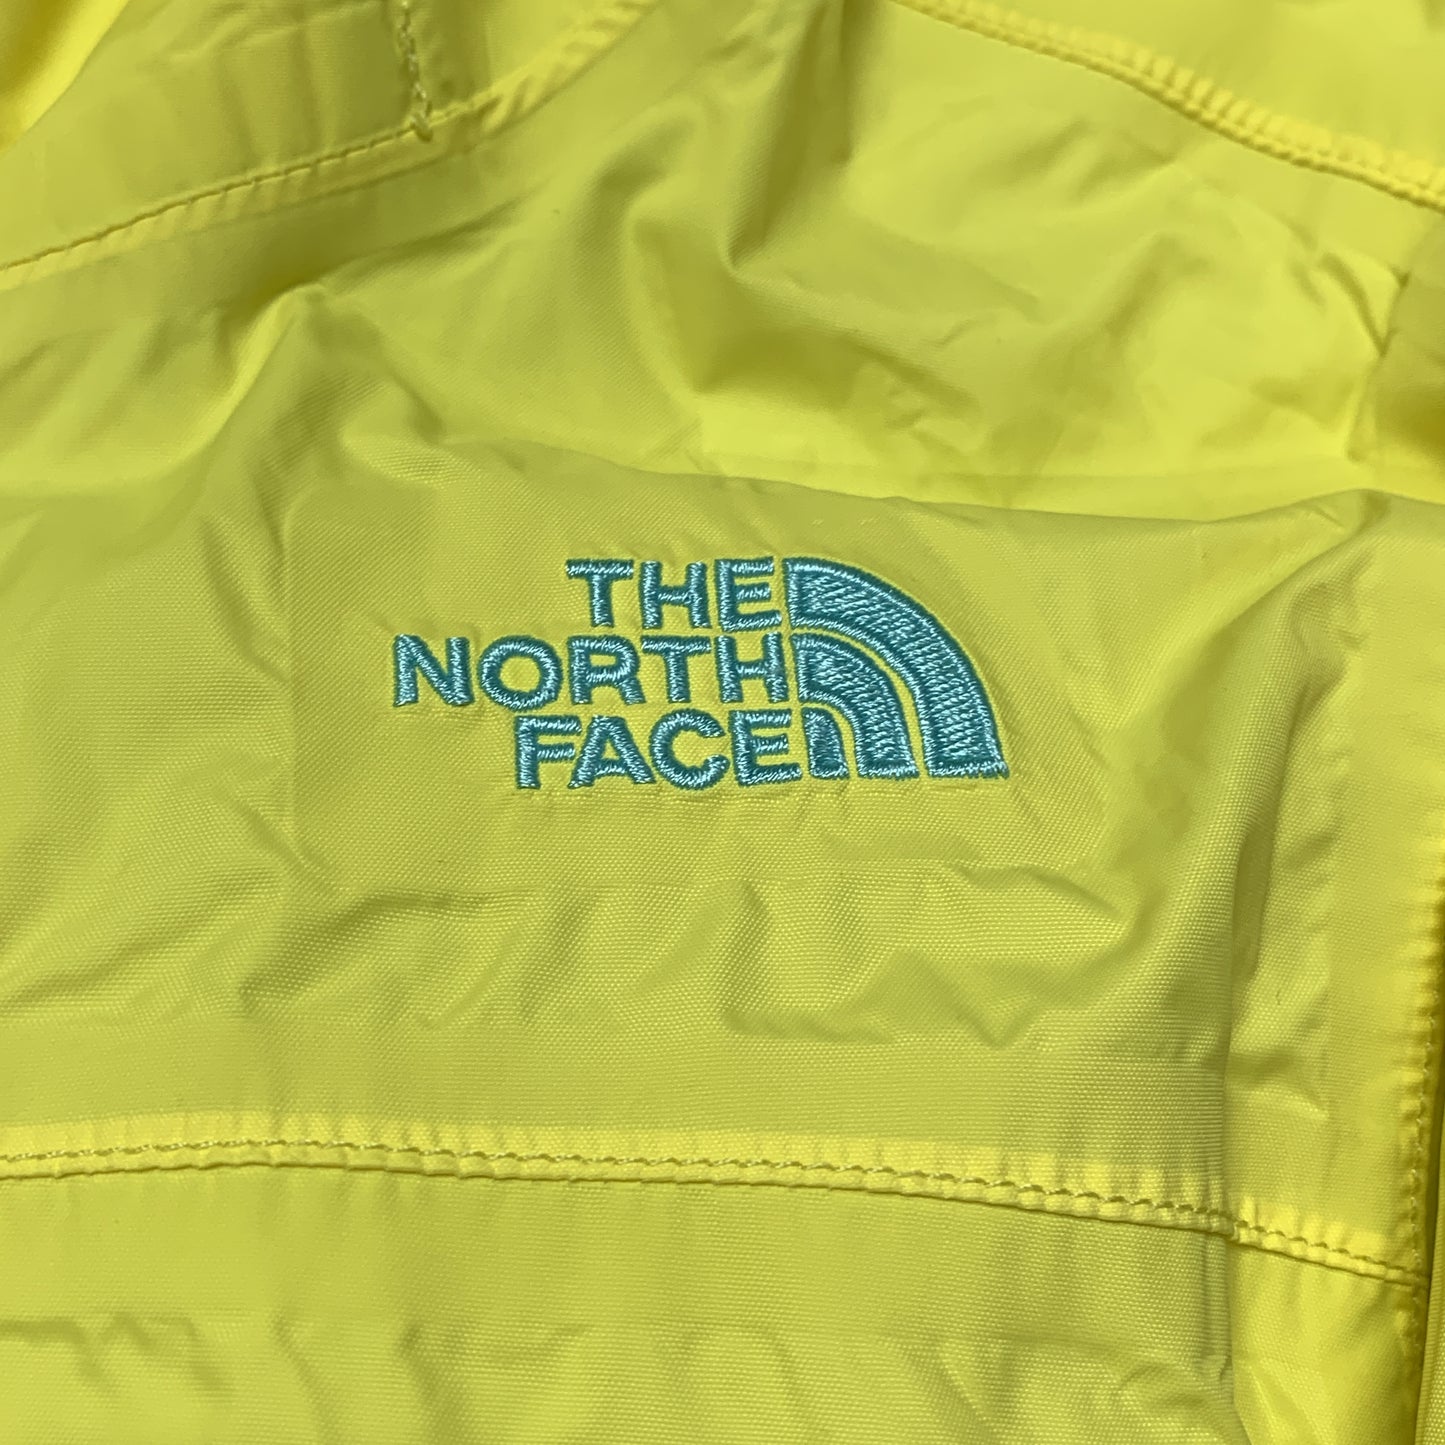 30005【THE NORTH FACE】ザノースフェイス キッズ HYVENT ハイベント ナイロンパーカー イエロー L